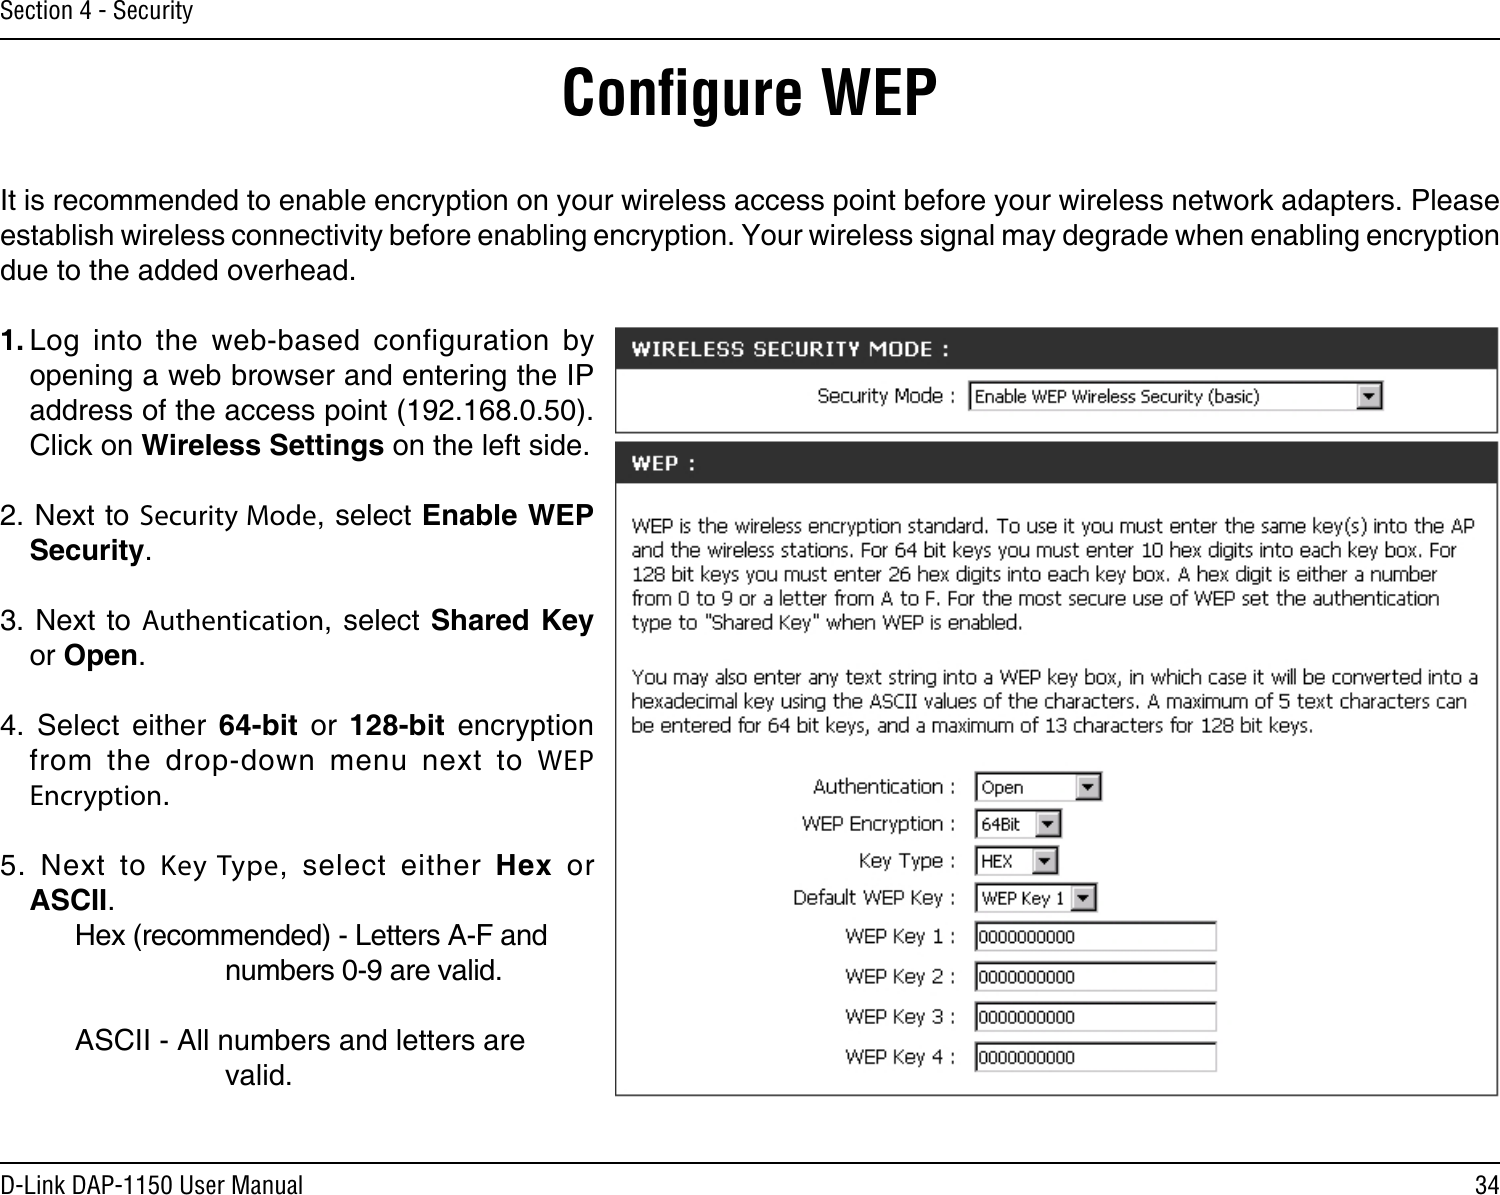 34D-Link DAP-1150 User ManualSection 4 - SecurityConﬁgure WEPIt is recommended to enable encryption on your wireless access point before your wireless network adapters. Please establish wireless connectivity before enabling encryption. Your wireless signal may degrade when enabling encryption due to the added overhead.1. Log  into  the  web-based  configuration  by opening a web browser and entering the IP address of the access point (192.168.0.50).  Click on Wireless Settings on the left side.2. Next to Security Mode, select Enable WEP Security.3. Next to Authentication, select Shared Key or Open.4.  Select  either  64-bit  or  128-bit  encryption from  the  drop-down  menu  next  to  WEP Encryption. 5.  Next  to  Key Type,  select  either  Hex  or ASCII.    Hex (recommended) - Letters A-F and        numbers 0-9 are valid.    ASCII - All numbers and letters are        valid.